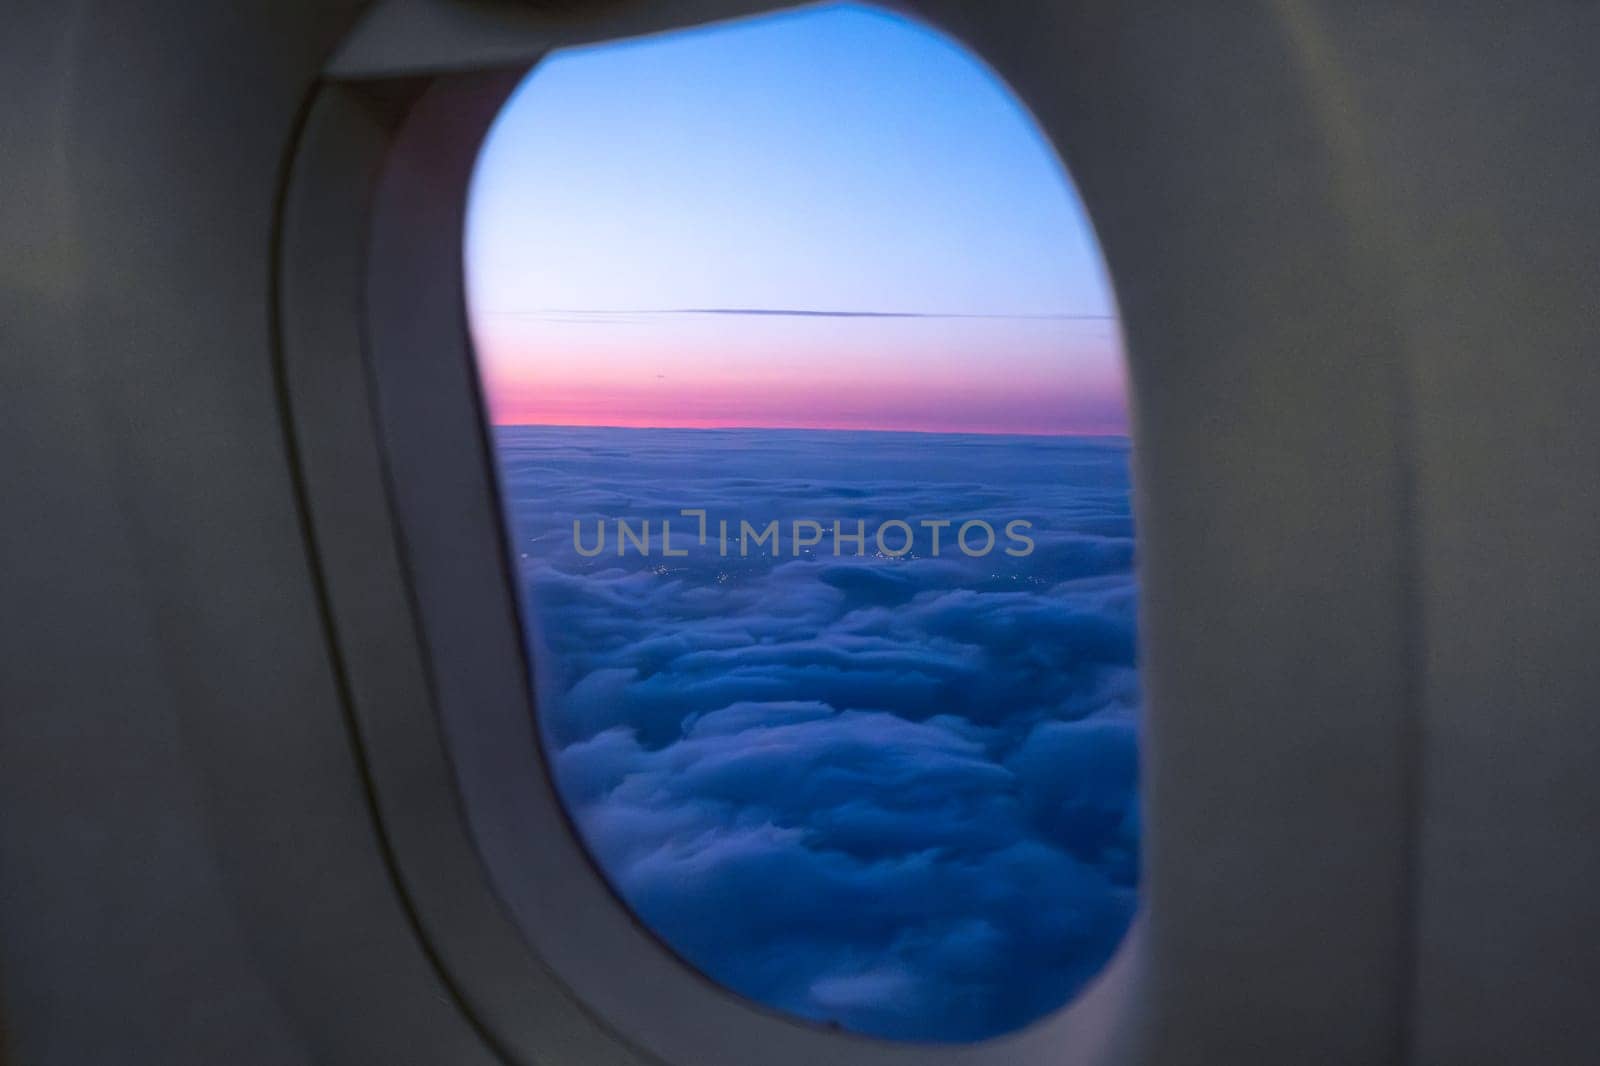 Amazing view of clouds and sunset in window on an airplane by vladimka